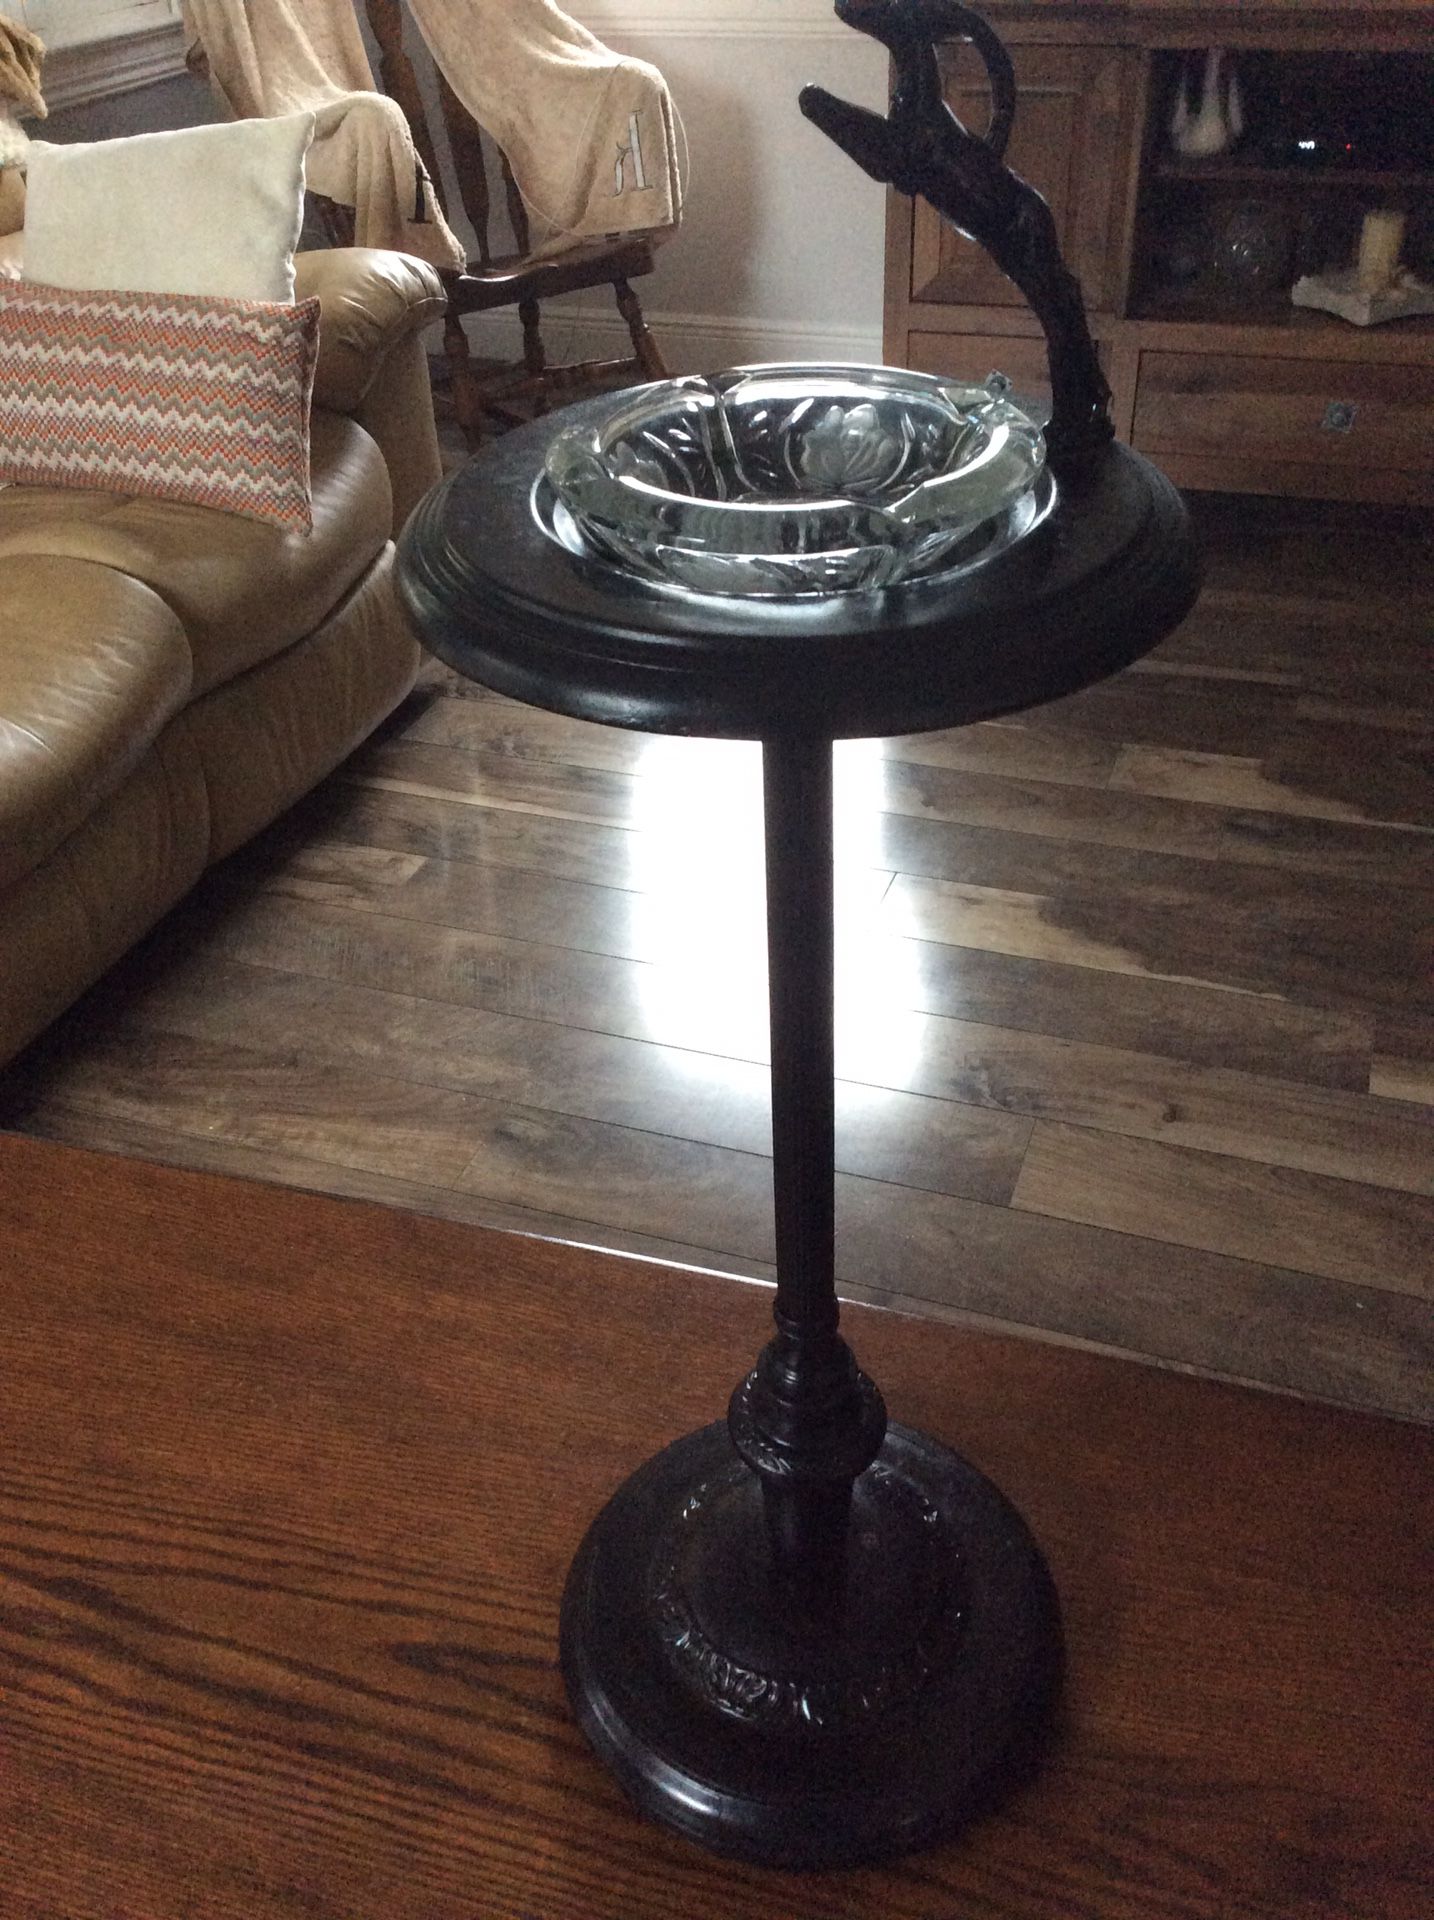 Vintage standing floor ashtray, tall vintage ashtray. 30 inches tall